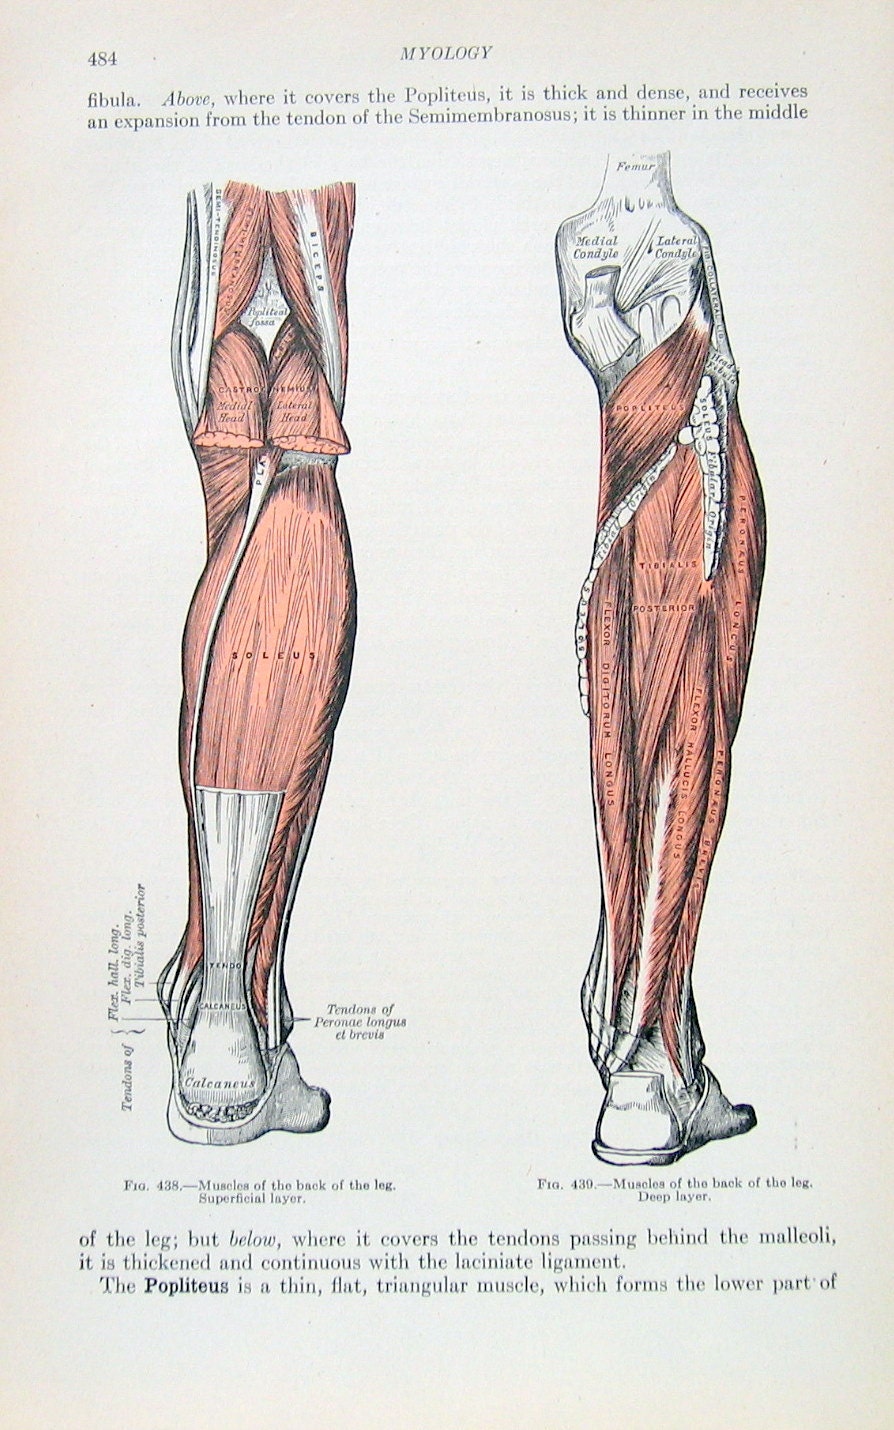 Muscles Of Human